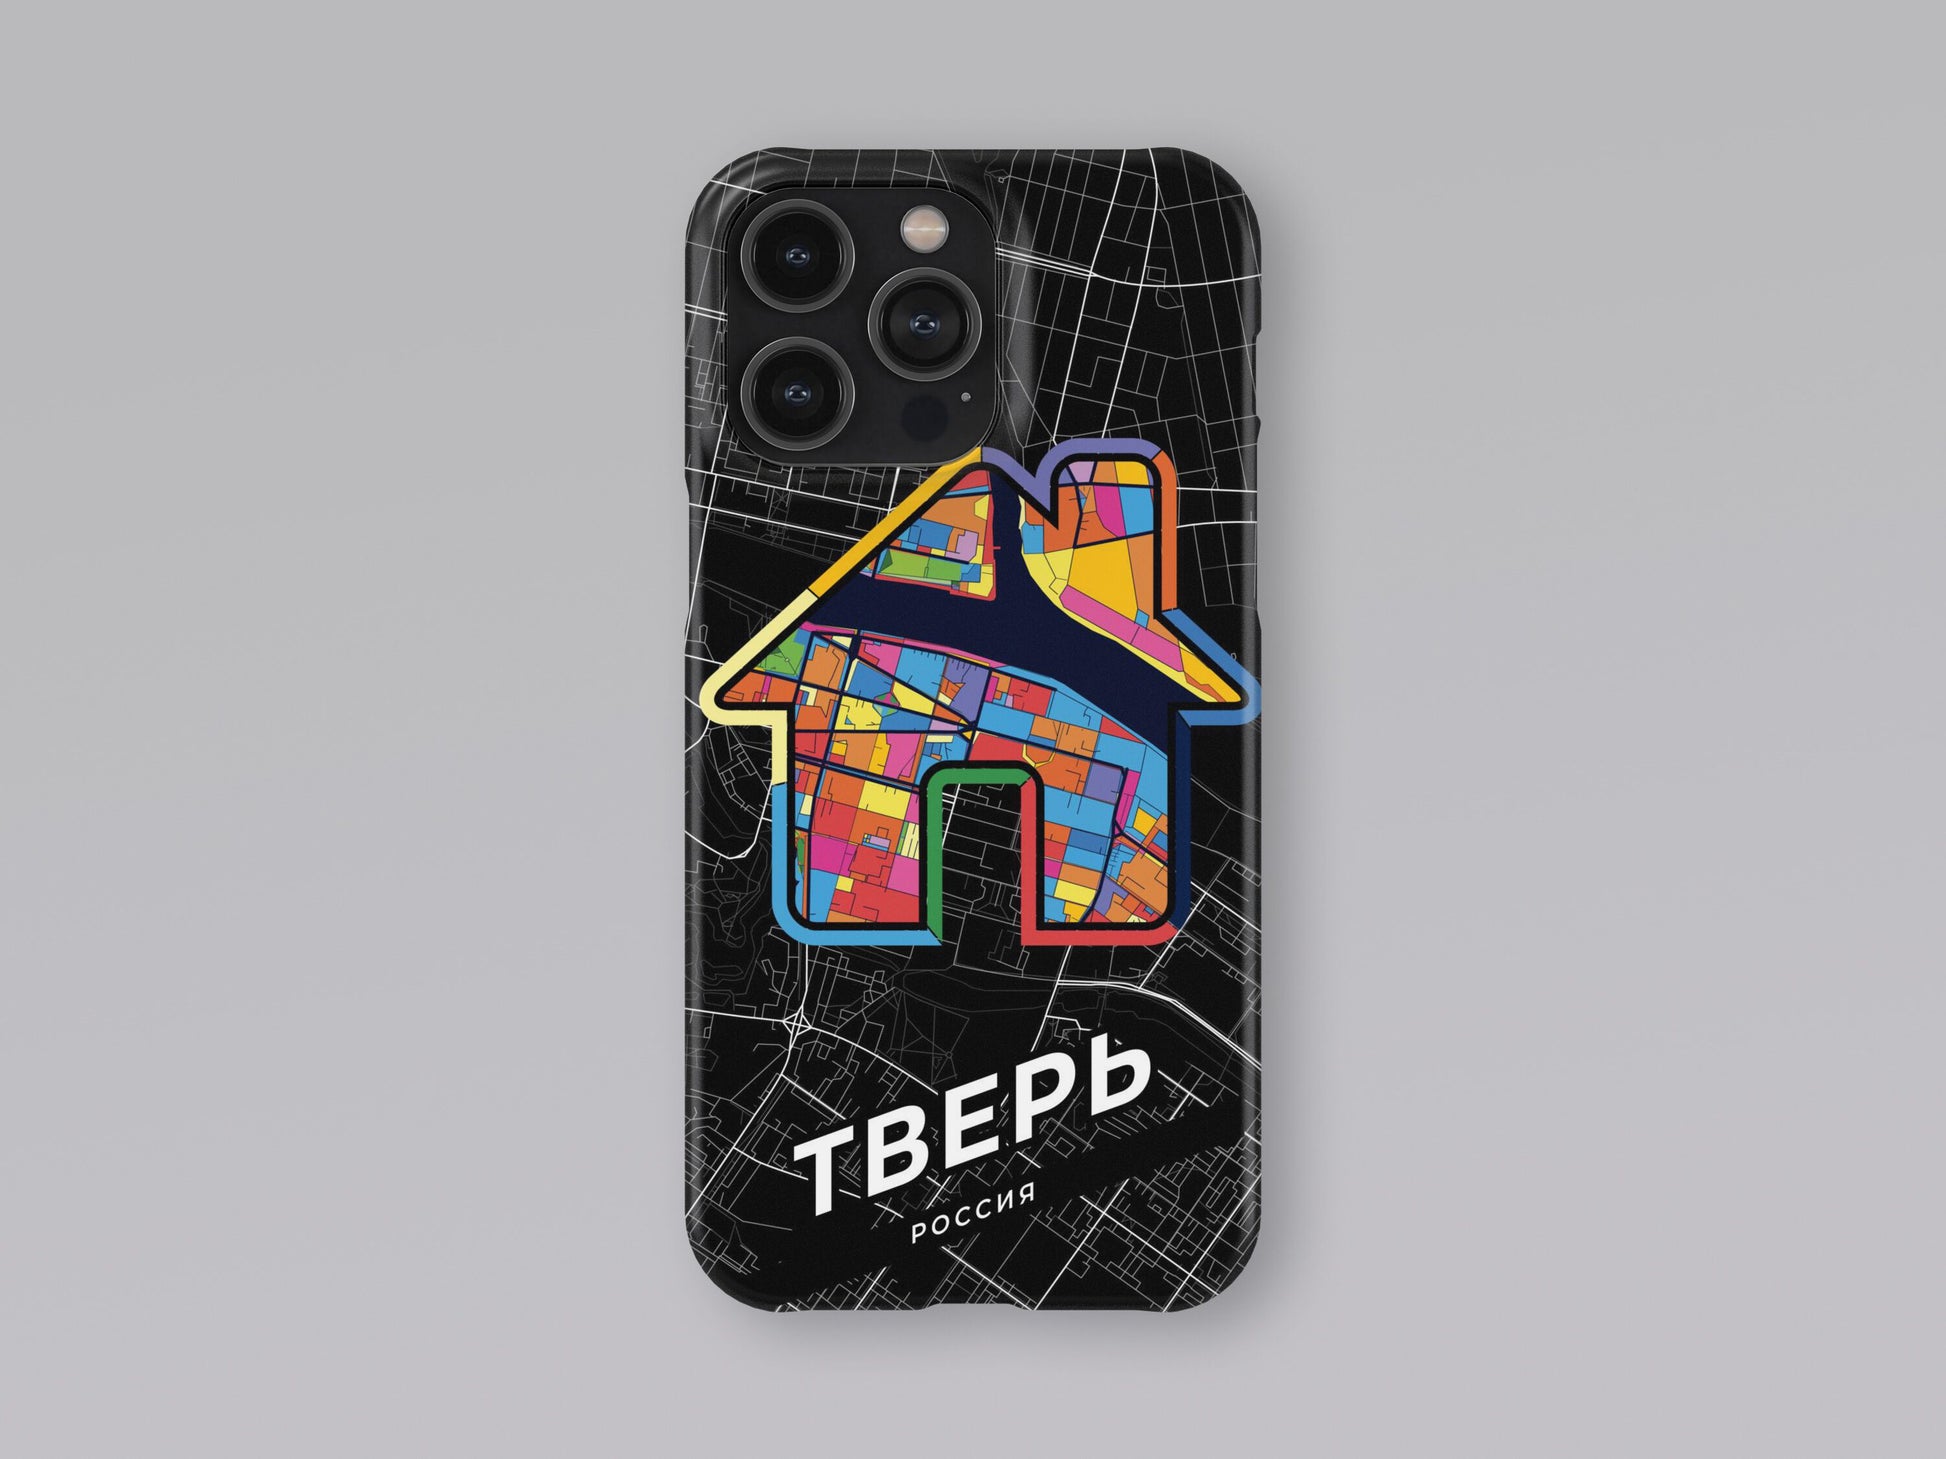 Tver Russia slim phone case with colorful icon 3